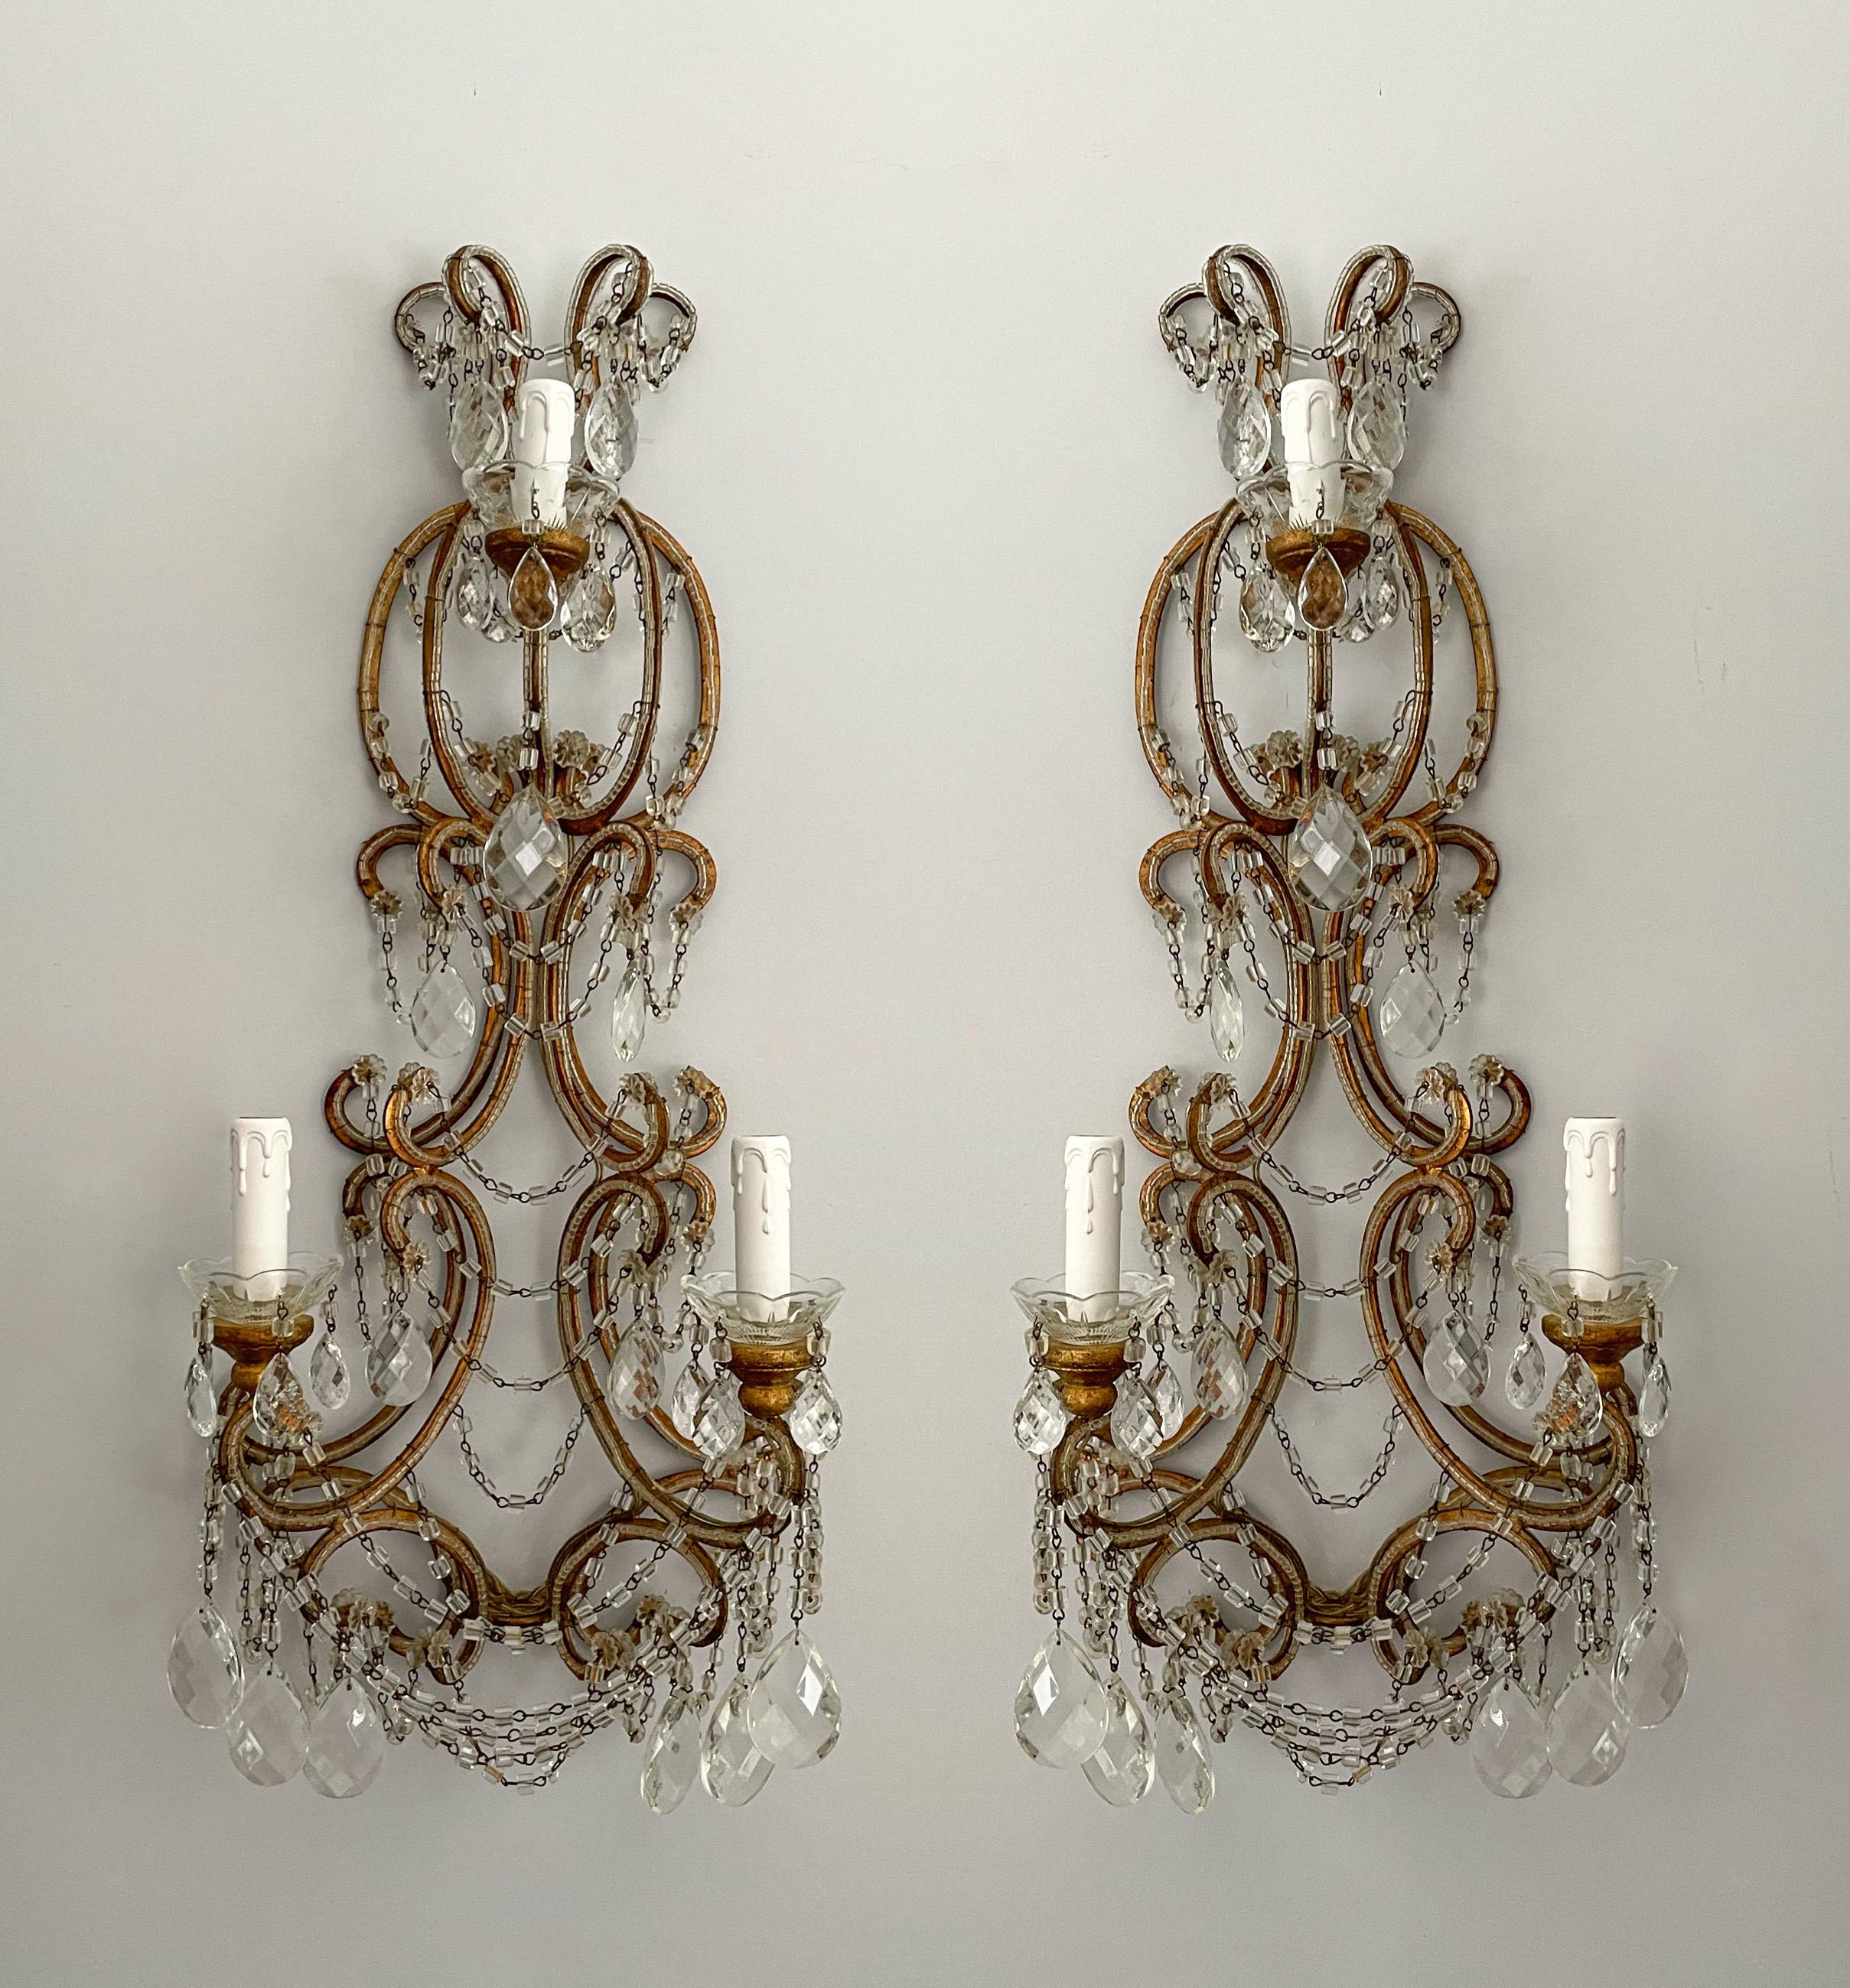 Exquisite, pair of Italian vintage gilt-iron and crystal beaded sconces. 

Each sconce features a hand scrolled and gilded iron frame outlines with small glass beads. “Macaroni” glass beads and faceted prisms complete the look subtle opulence. 

The